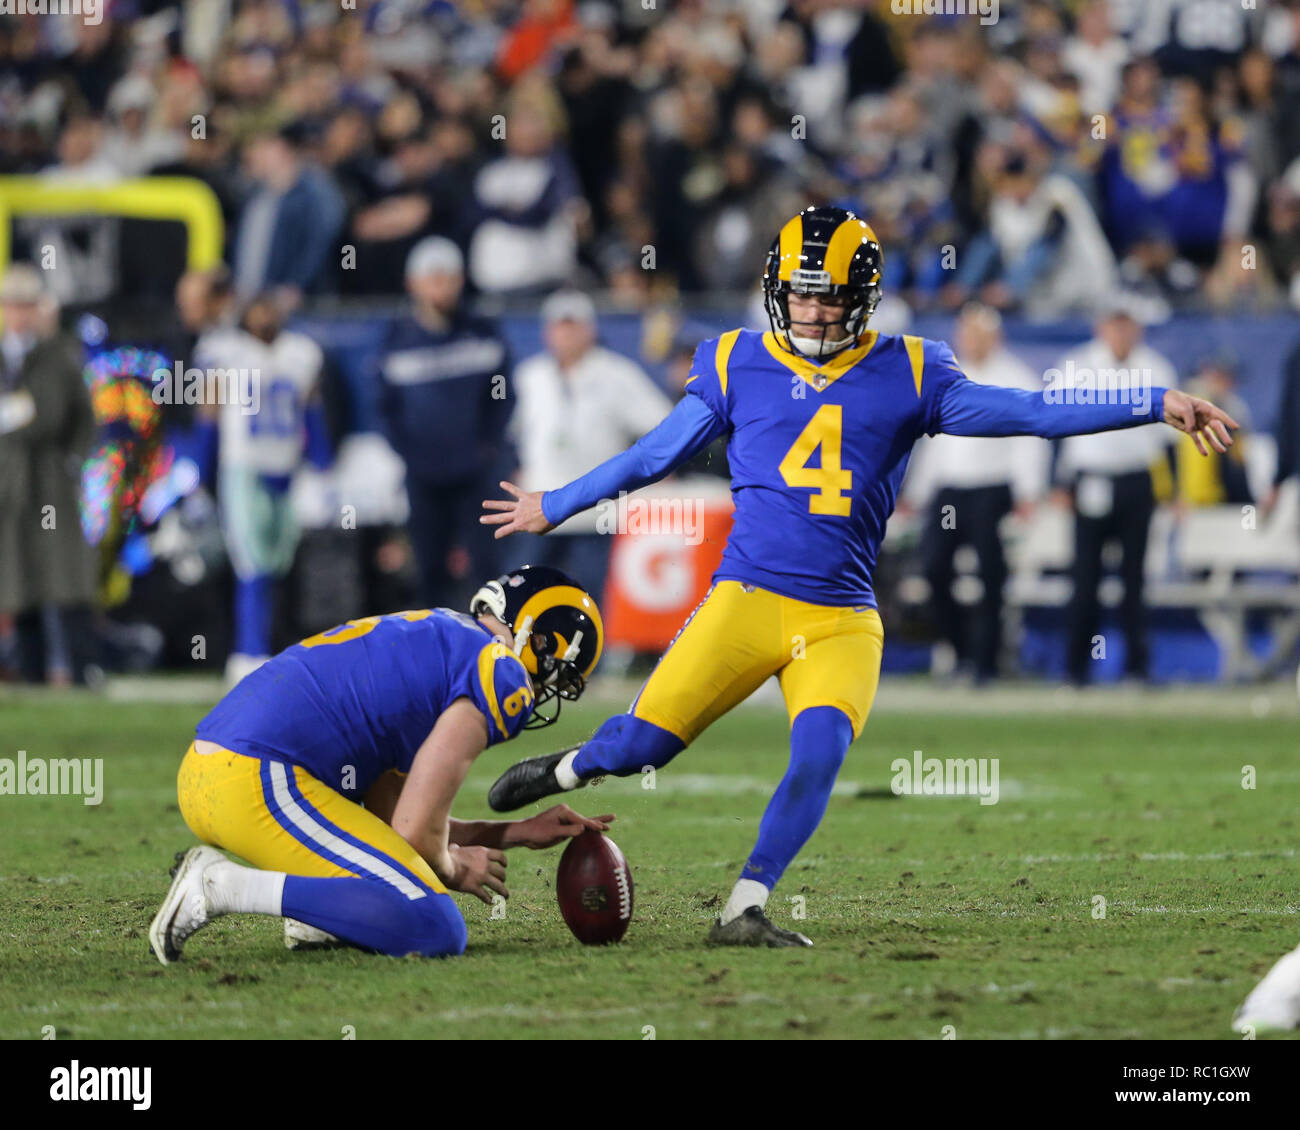 Los Angeles, CA, USA. 12th Jan, 2019. Los Angeles Rams kicker Greg Zuerlein  (4) kicking extra point during the NFL Divisional Playoffs game between  Dallas Cowboys vs Los Angeles Rams at the